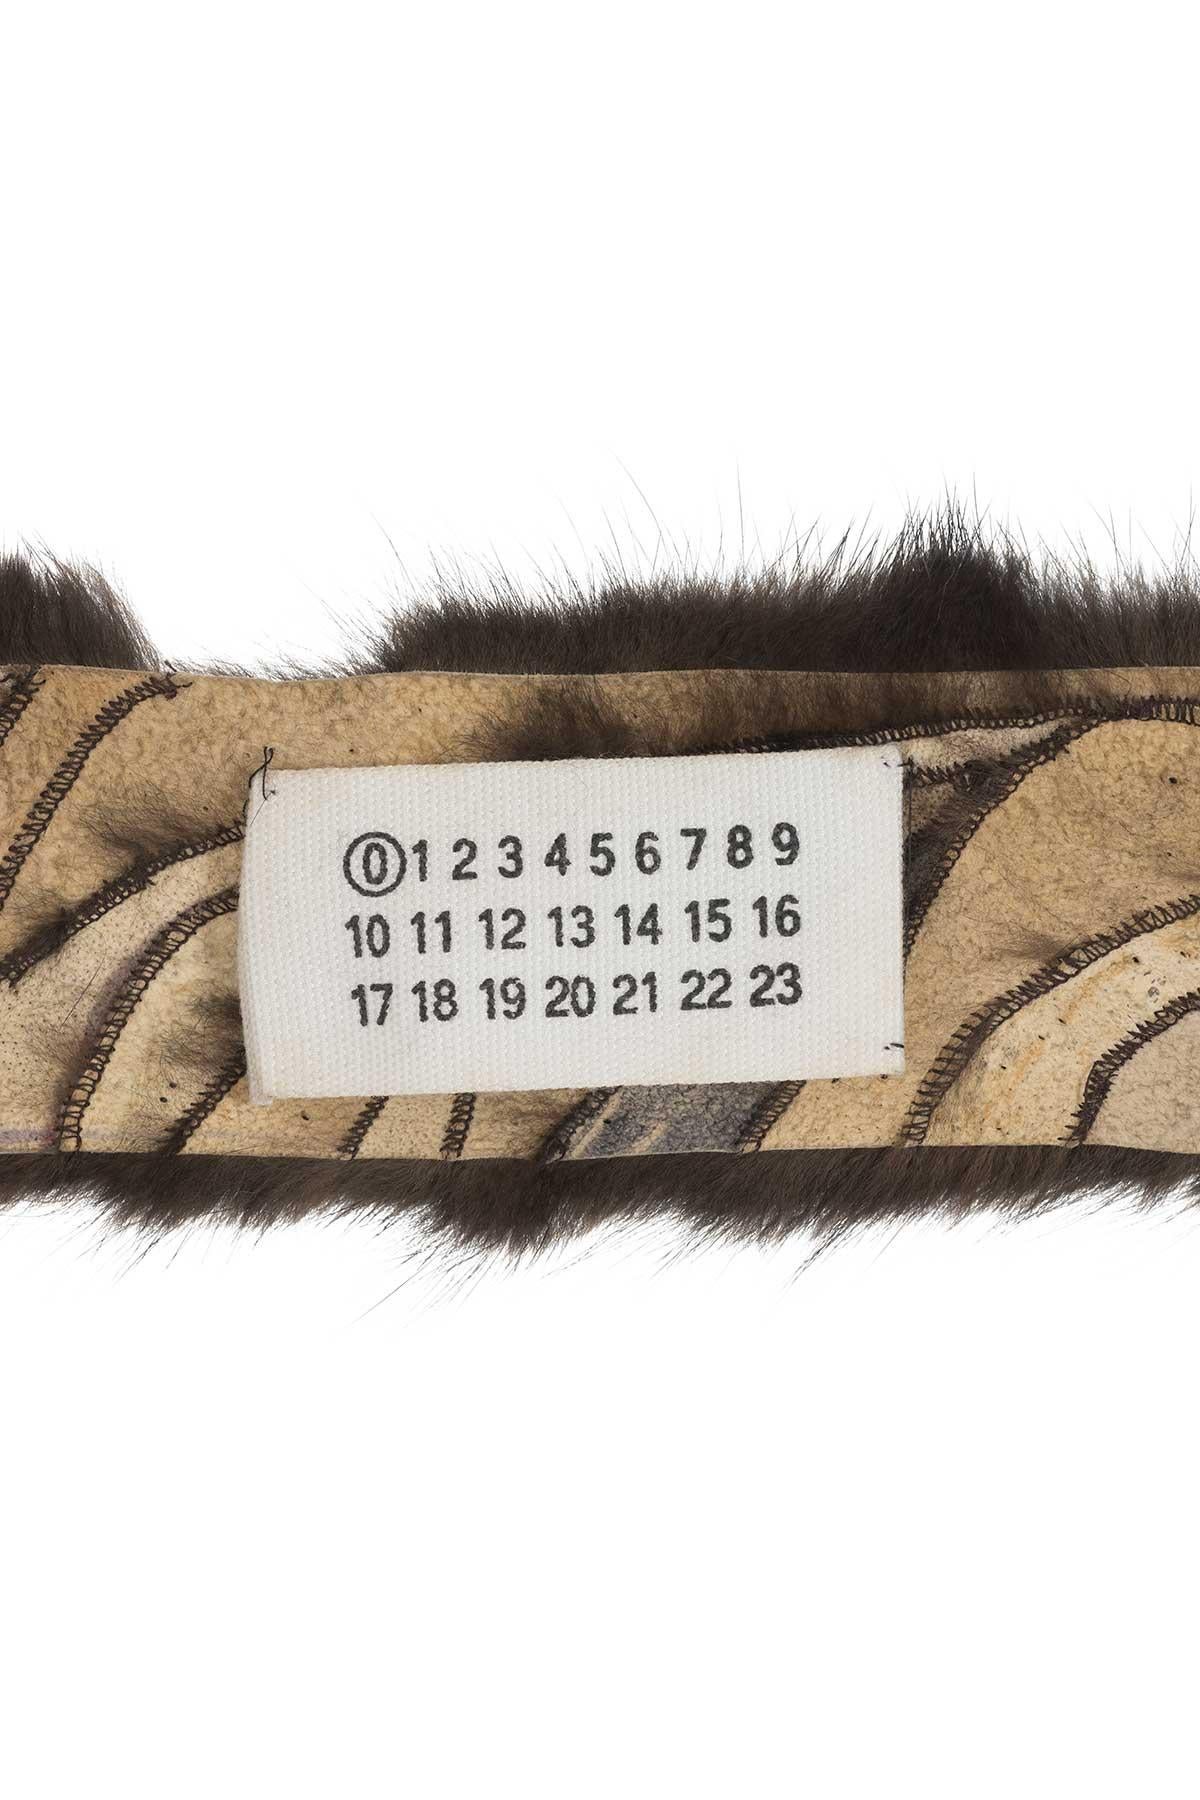 Women's or Men's MAISON MARTIN MARGIELA FW 01 Iconic and Rare Upcycled Mink Scarf For Sale